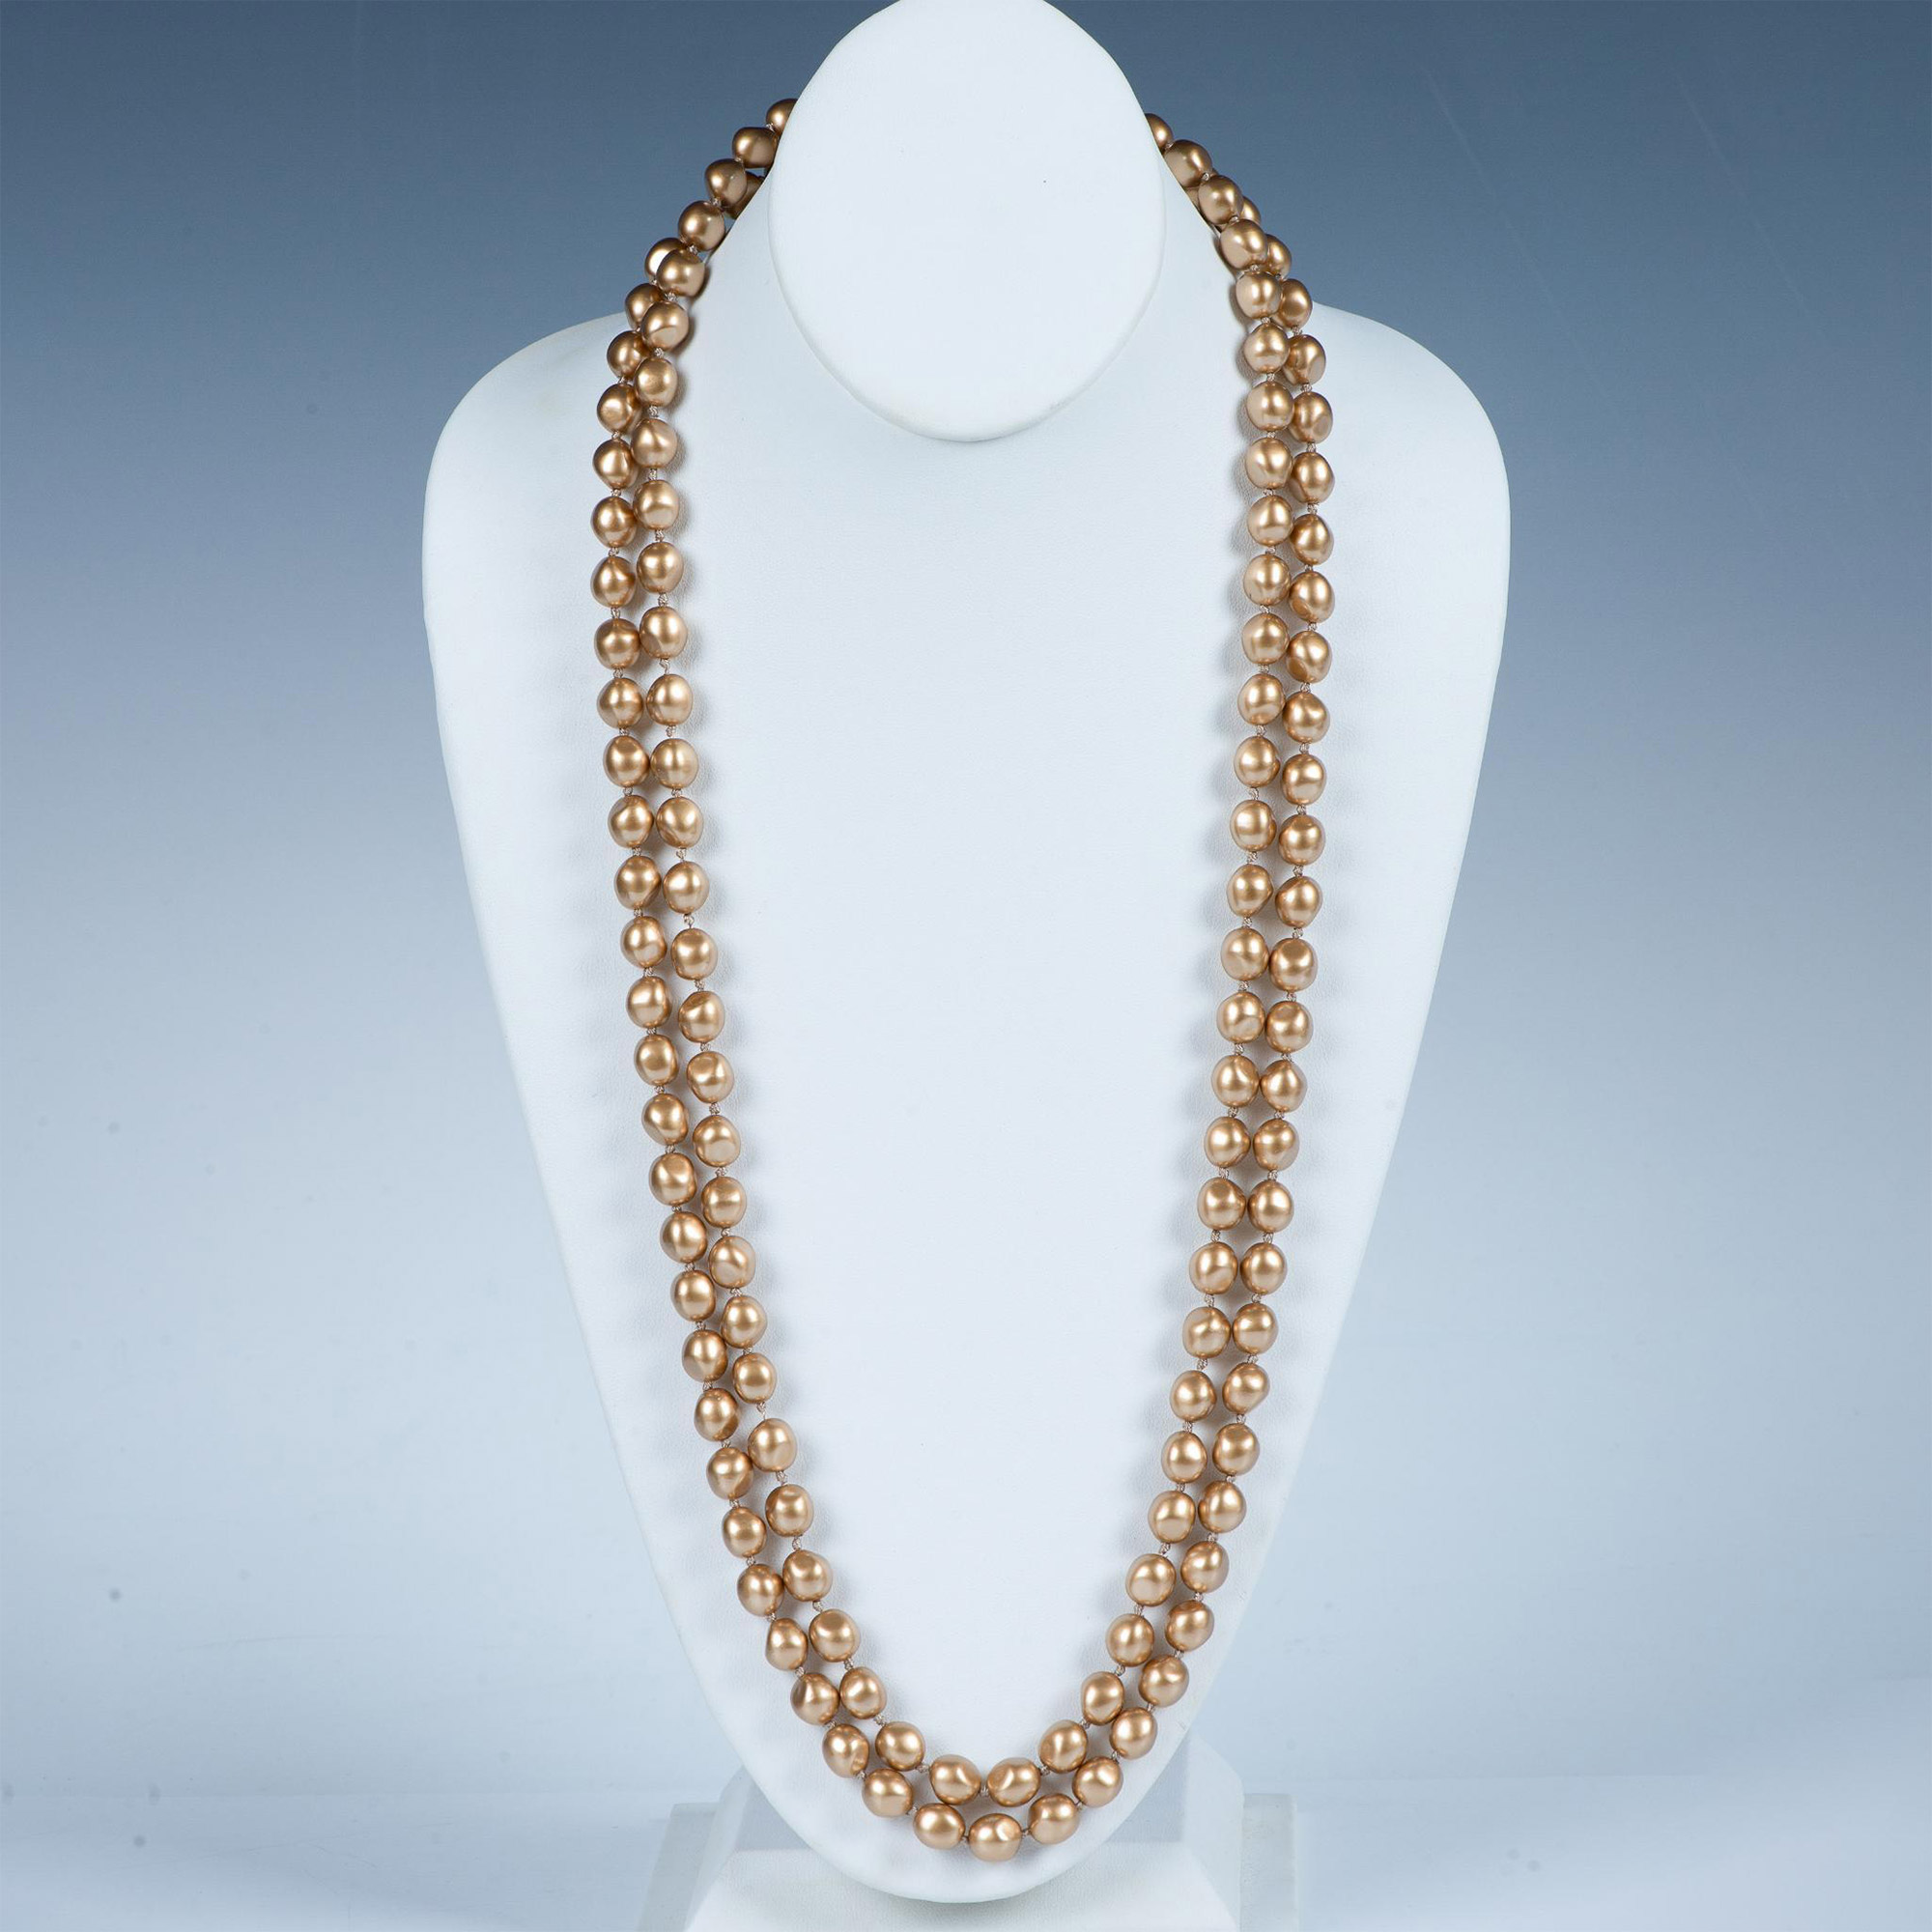 3pc Carolee Golden Baroque Faux Pearl Necklace and Earrings - Image 4 of 6